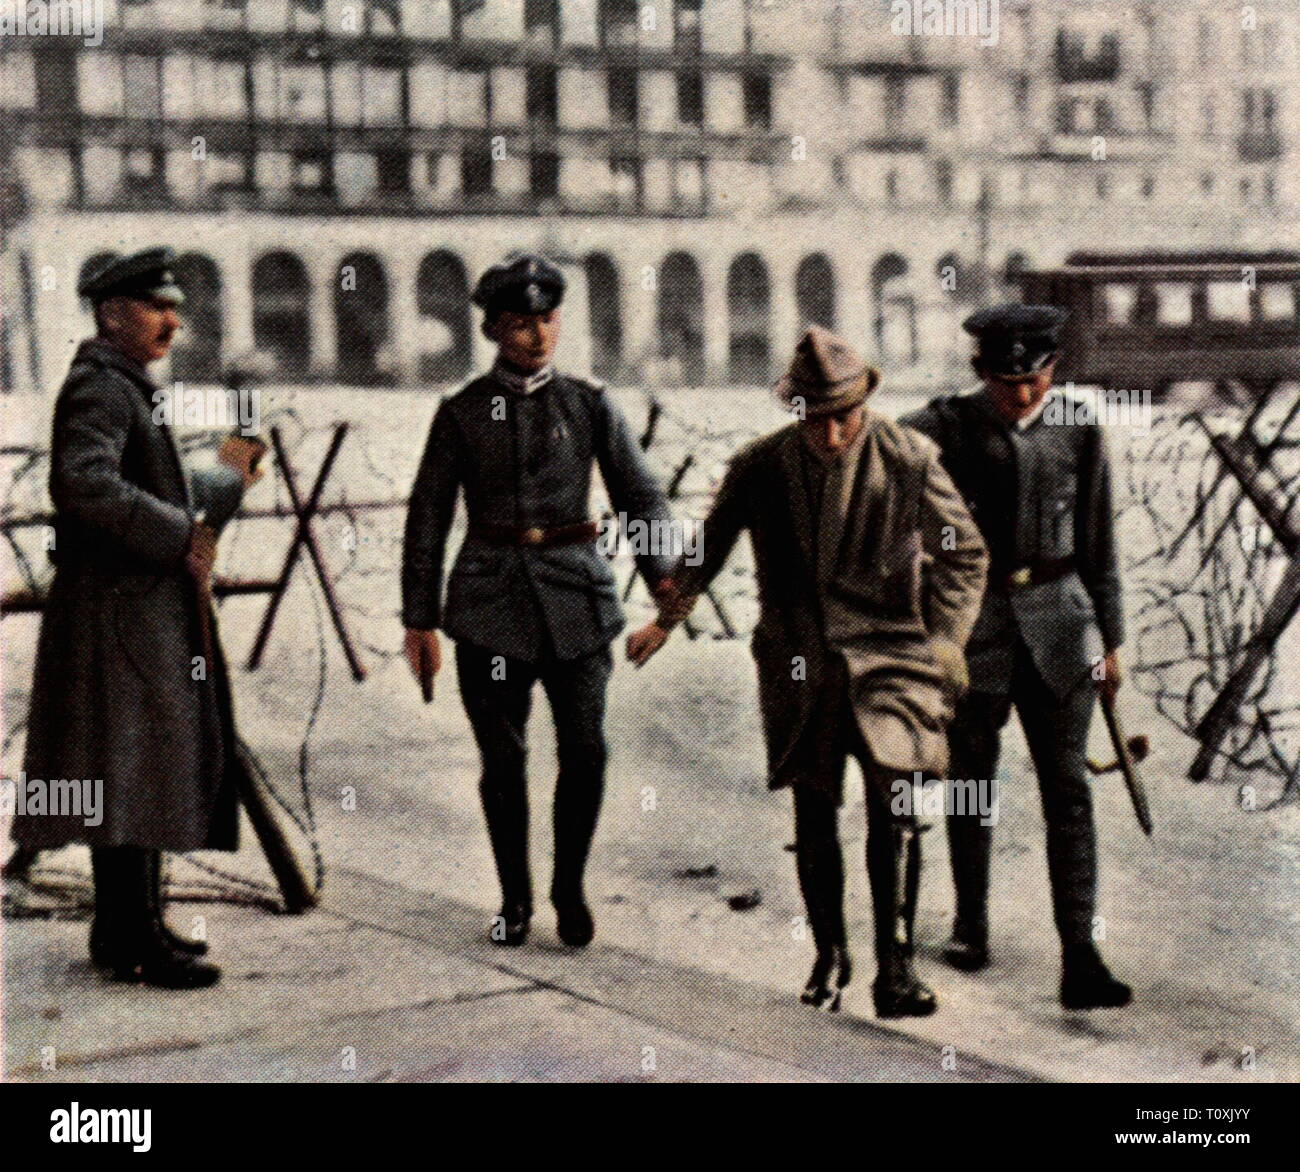 Riots in Hamburg, February 1921, arresting a ringleader, coloured photograph, cigarette card, series "Die Nachkriegszeit", 1935, police, policemen, policeman, detain, detaining, Germany, German Reich, Third Reich, Weimar Republic, 1920s, 20th century, riot, riots, under arrest, ringleader, gang leader, ringleaders, gang leaders, coloured, colored, post war period, post-war period, post-war years, post-war era, historic, historical, Additional-Rights-Clearance-Info-Not-Available Stock Photo